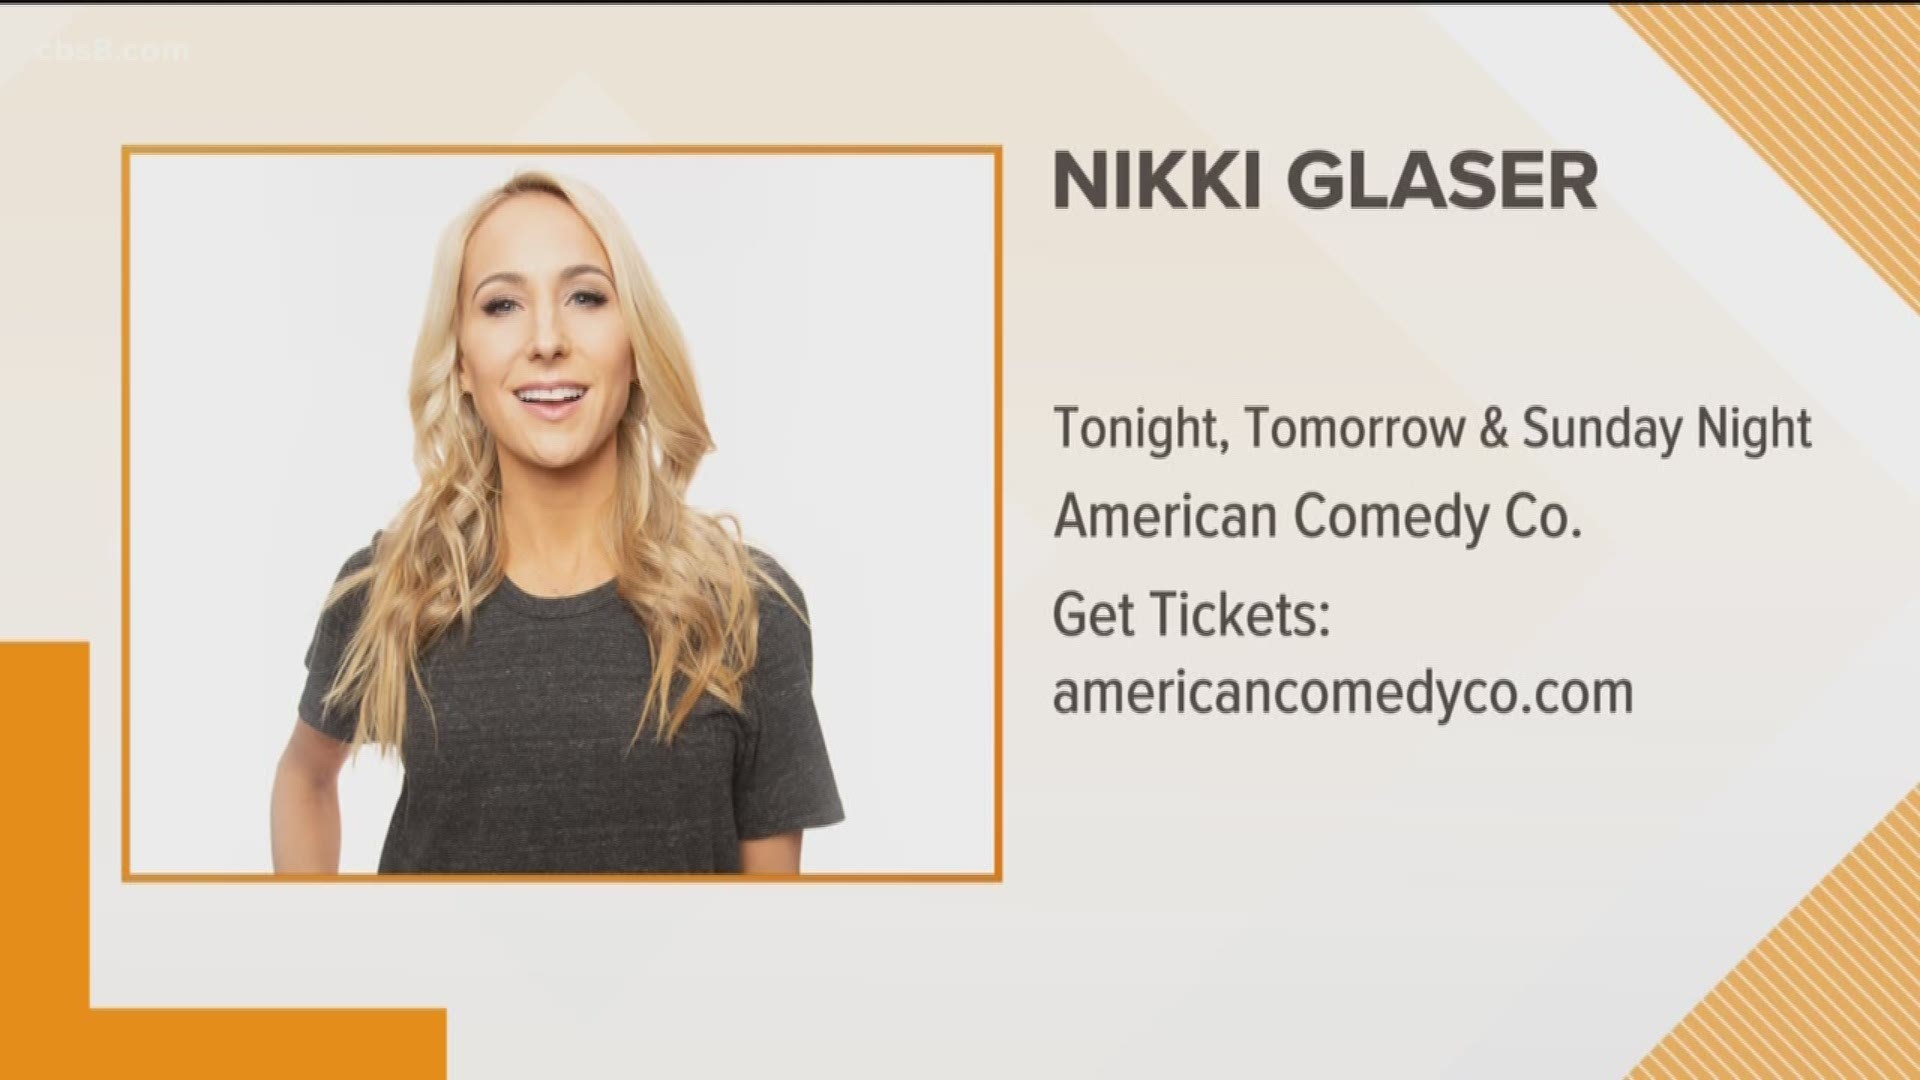 See Nikki Glaser Saturday & Sunday night at American Comedy Co. in the Gaslamp San Diego